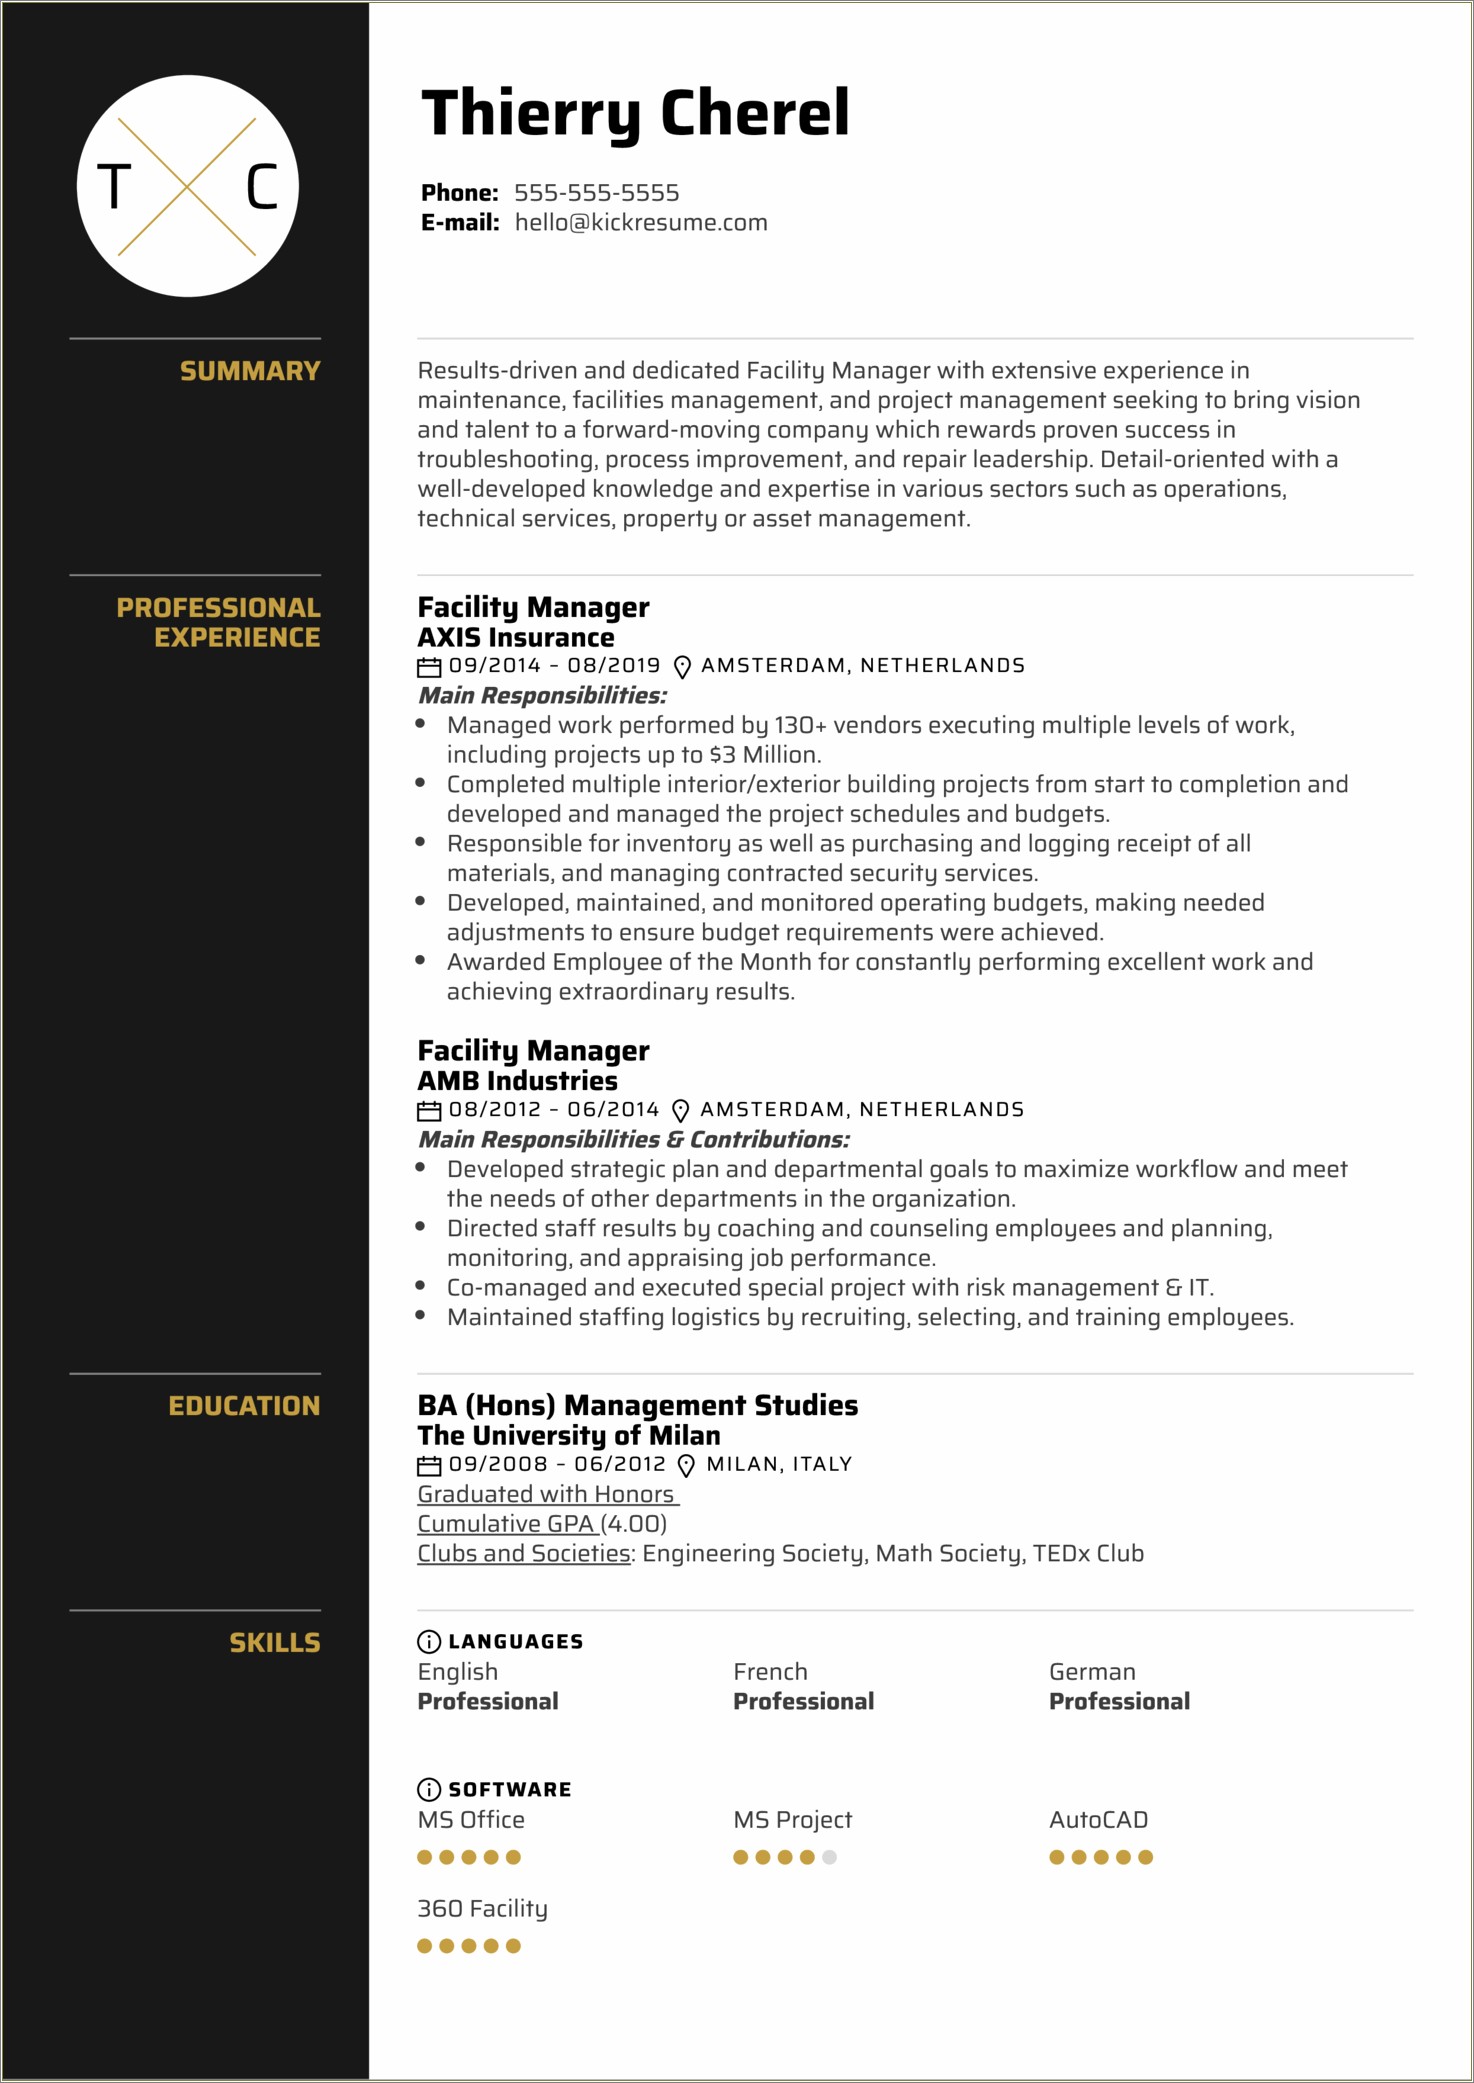 Scholary Resume For Facility Manager Gold Coast